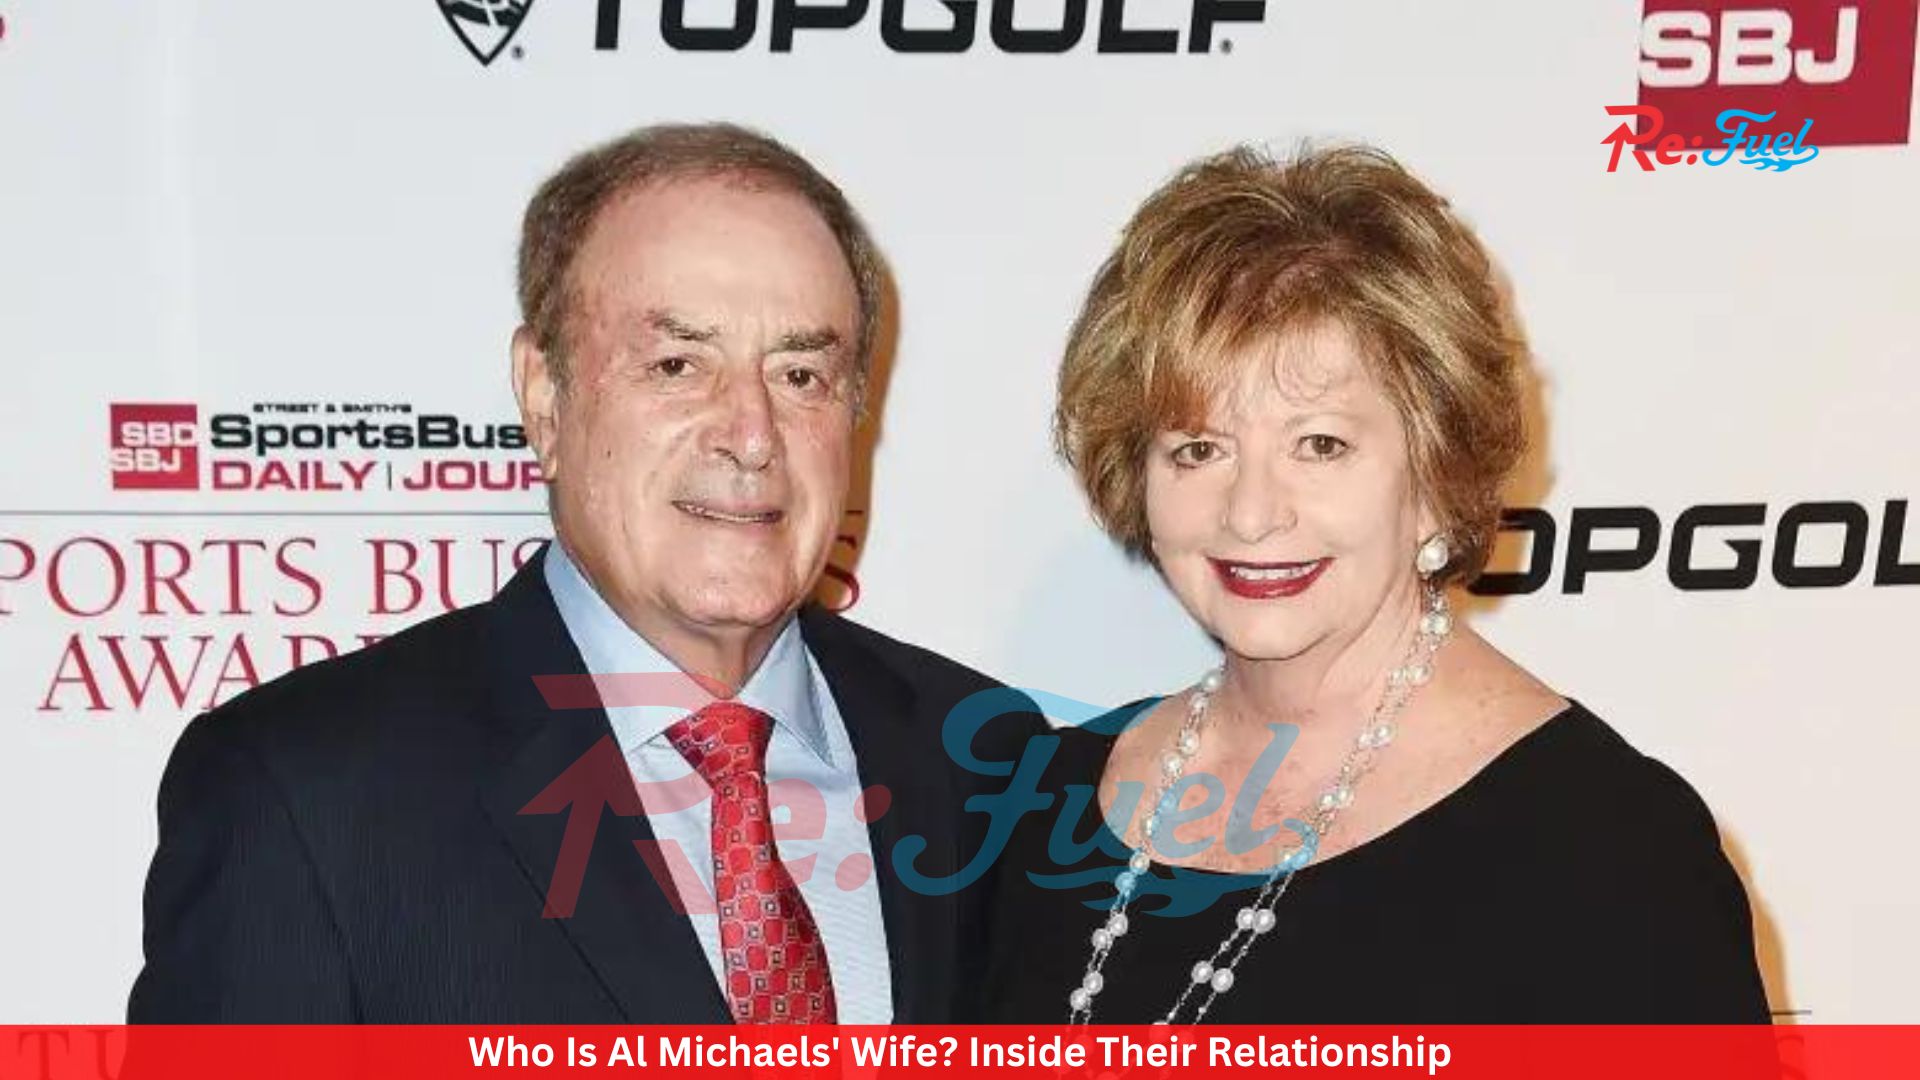 Who Is Al Michaels' Wife? Inside Their Relationship